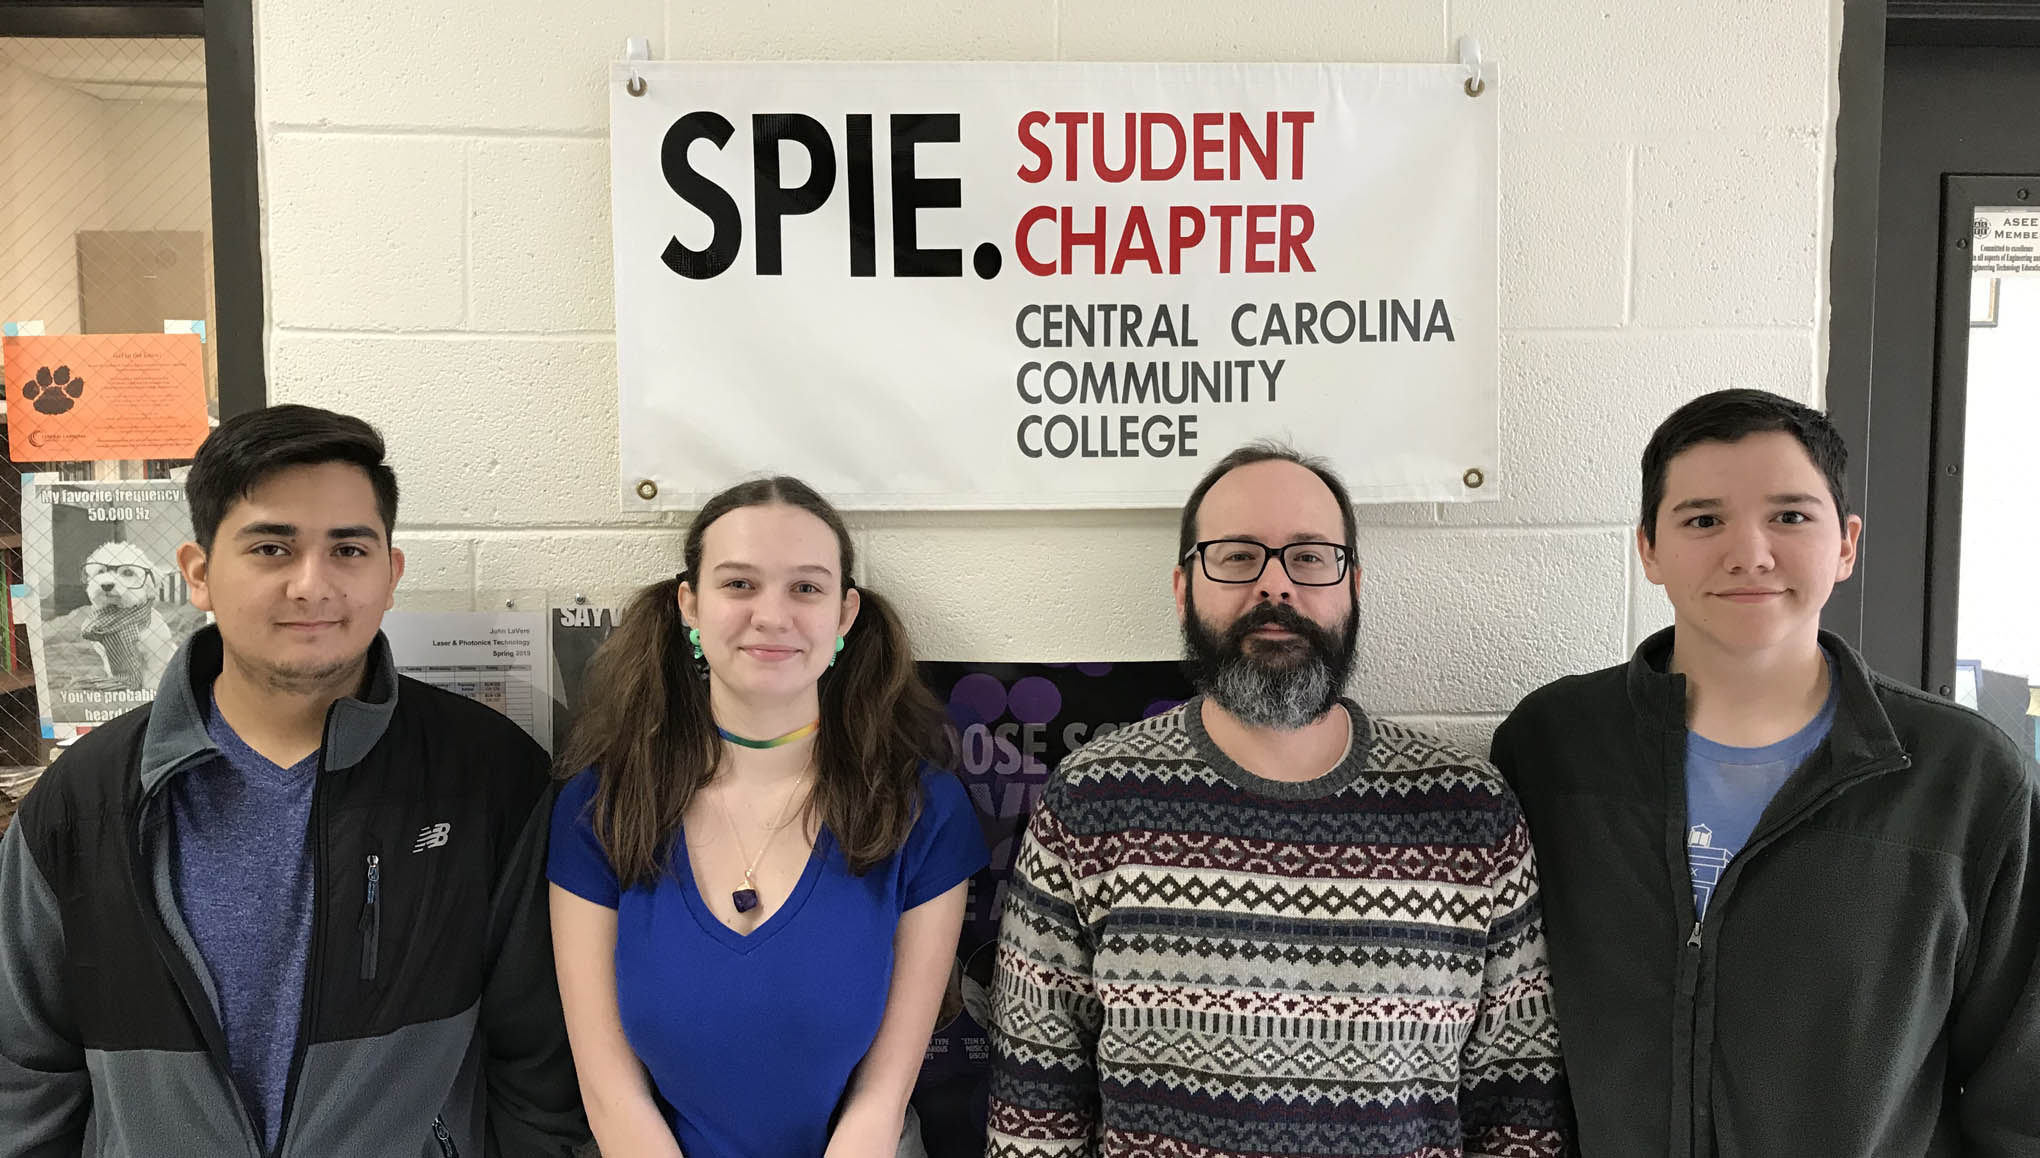 Click to enlarge,  The Central Carolina Community College SPIE Student Chapter will host an "Interviewing Skills Panel" on Monday, March 18, in the Miriello Building (Multi-Purpose Room 135) at the CCCC Harnett Main Campus, 1075 E. Cornelius Harnett Blvd., Lillington. Pictured here are CCCC SPIE Student Chapter officers (left to right) Angel Gonzalez (Vice President), Skylar Overby (President), John Brooks (Treasurer), and Michael Murray (Secretary). 